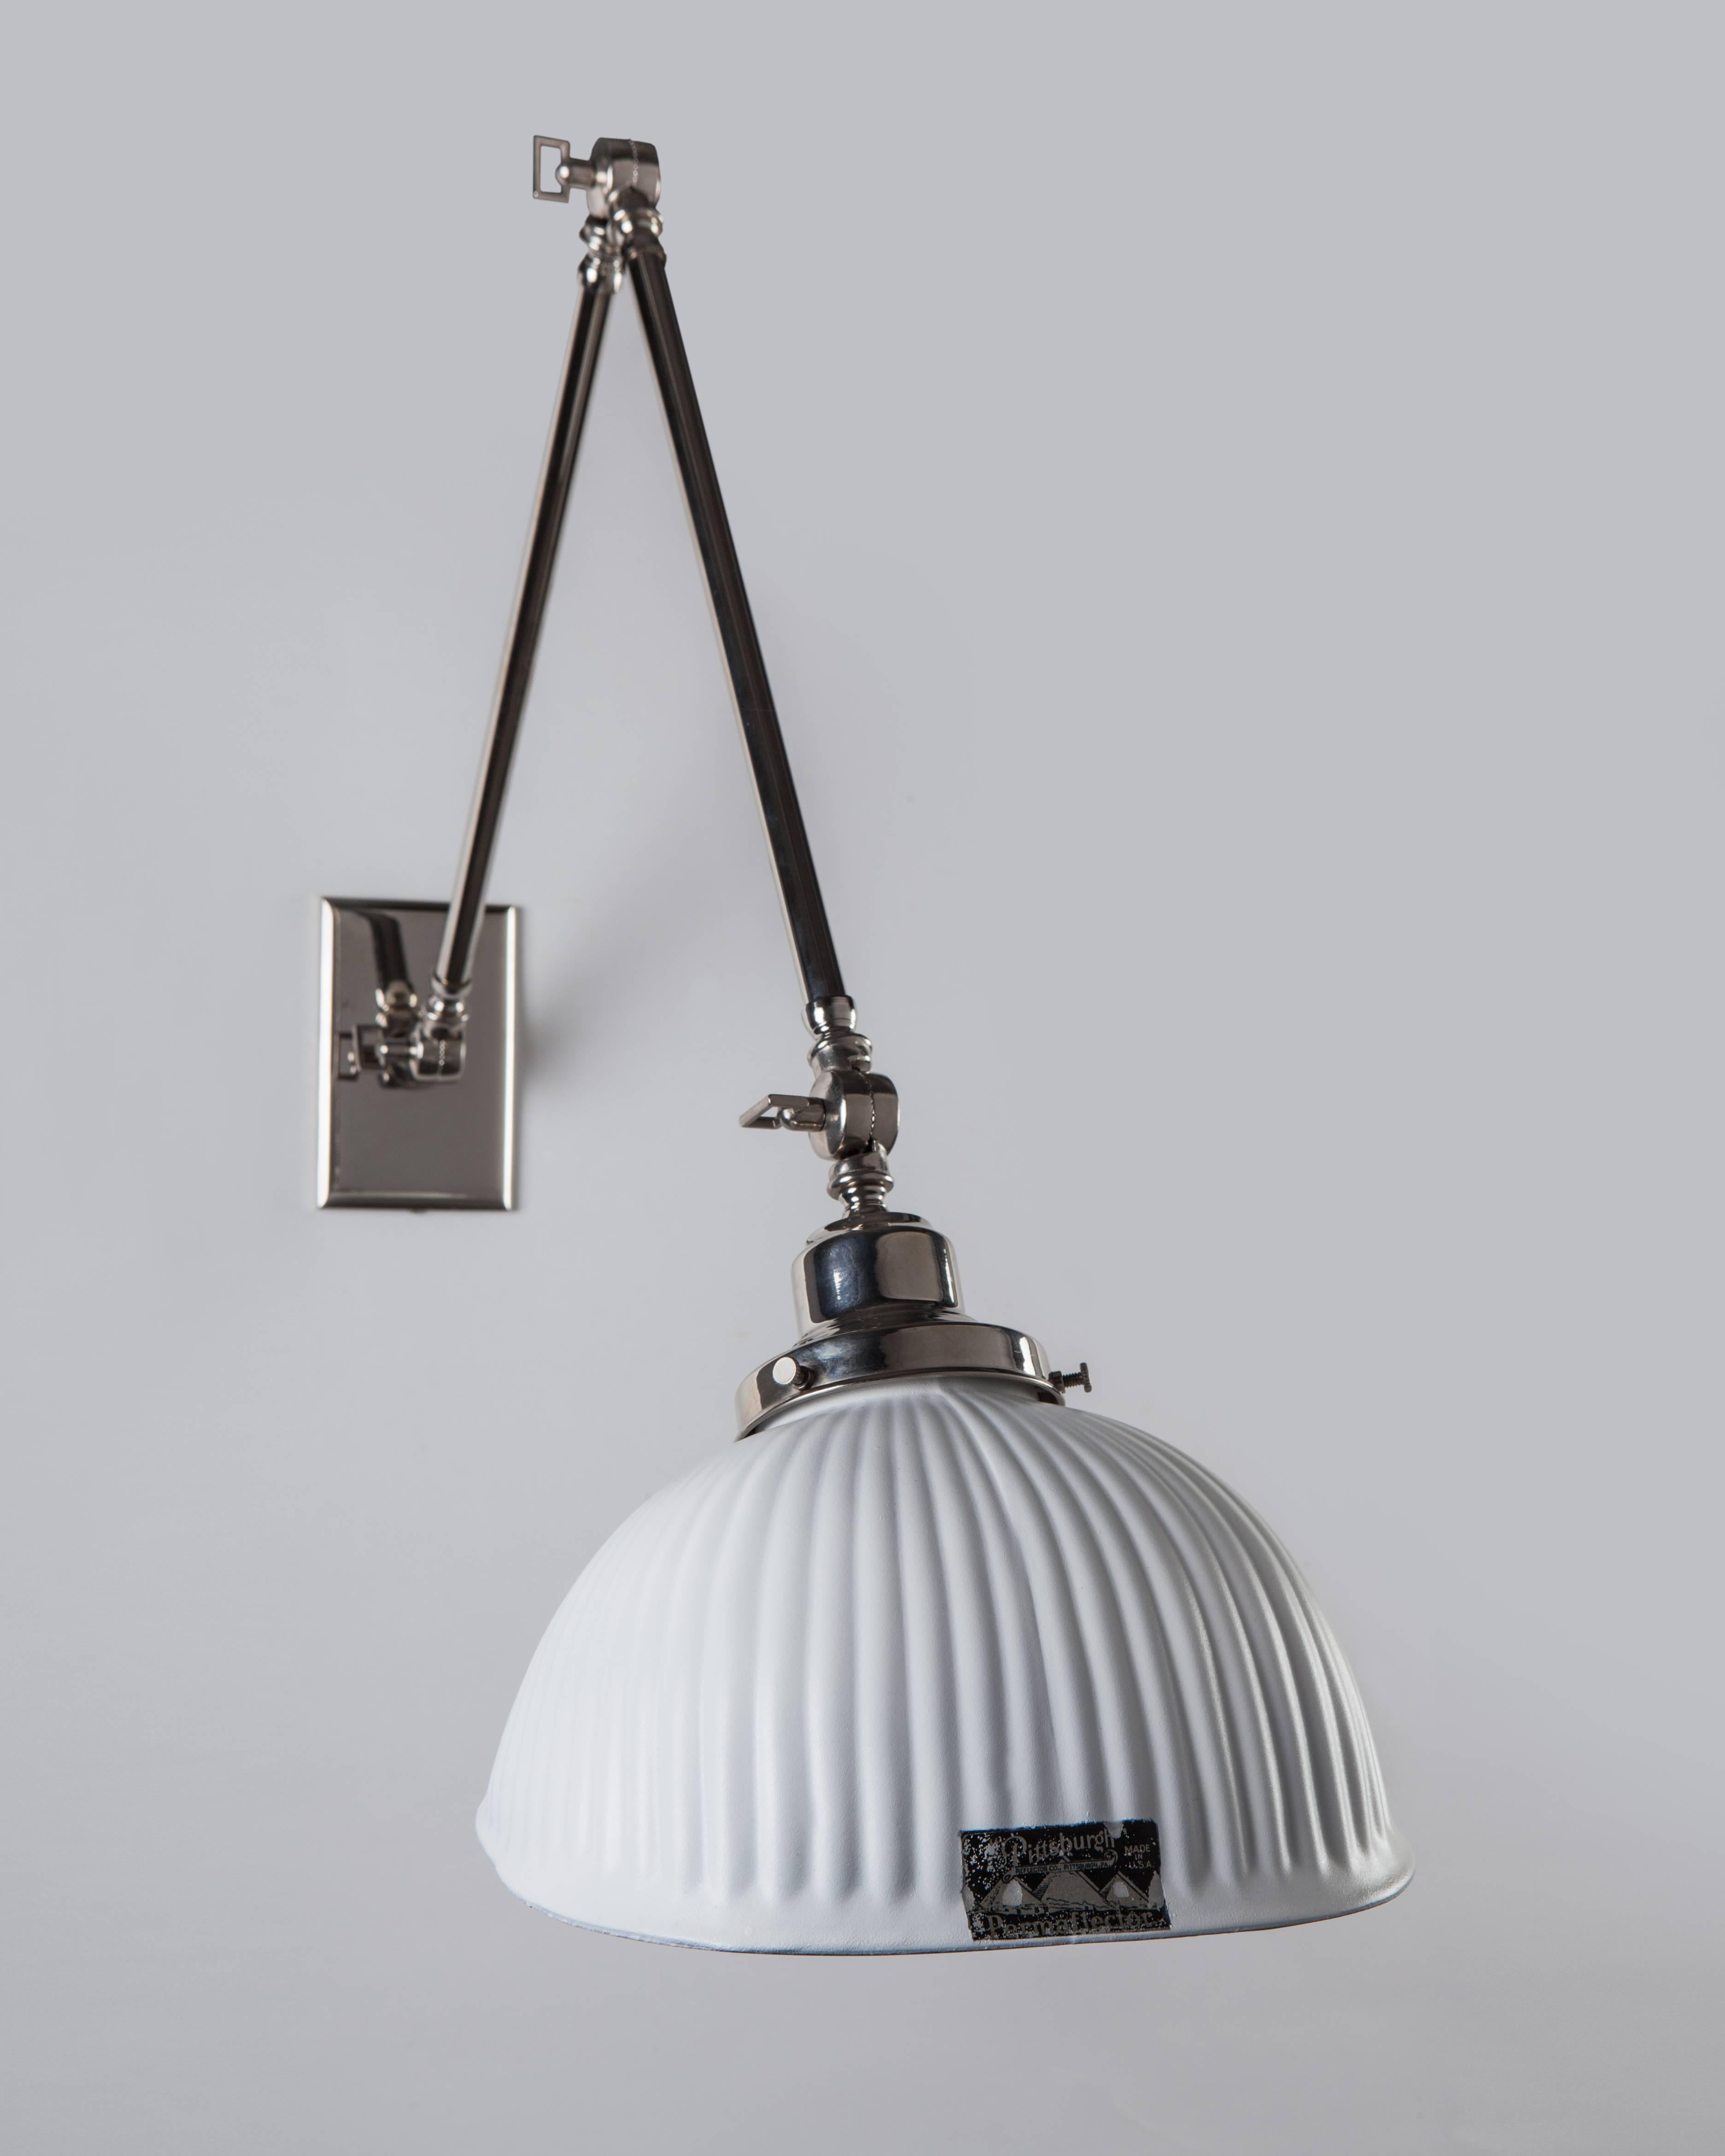 AIS2940

A long-limbed wall-mounted industrial reading lamp with a squared white lacquered mercury glass shade. On polished nickel fittings custom-made in the Remains Lighting workshop. The glass bearing the mark of the Pennsylvania maker